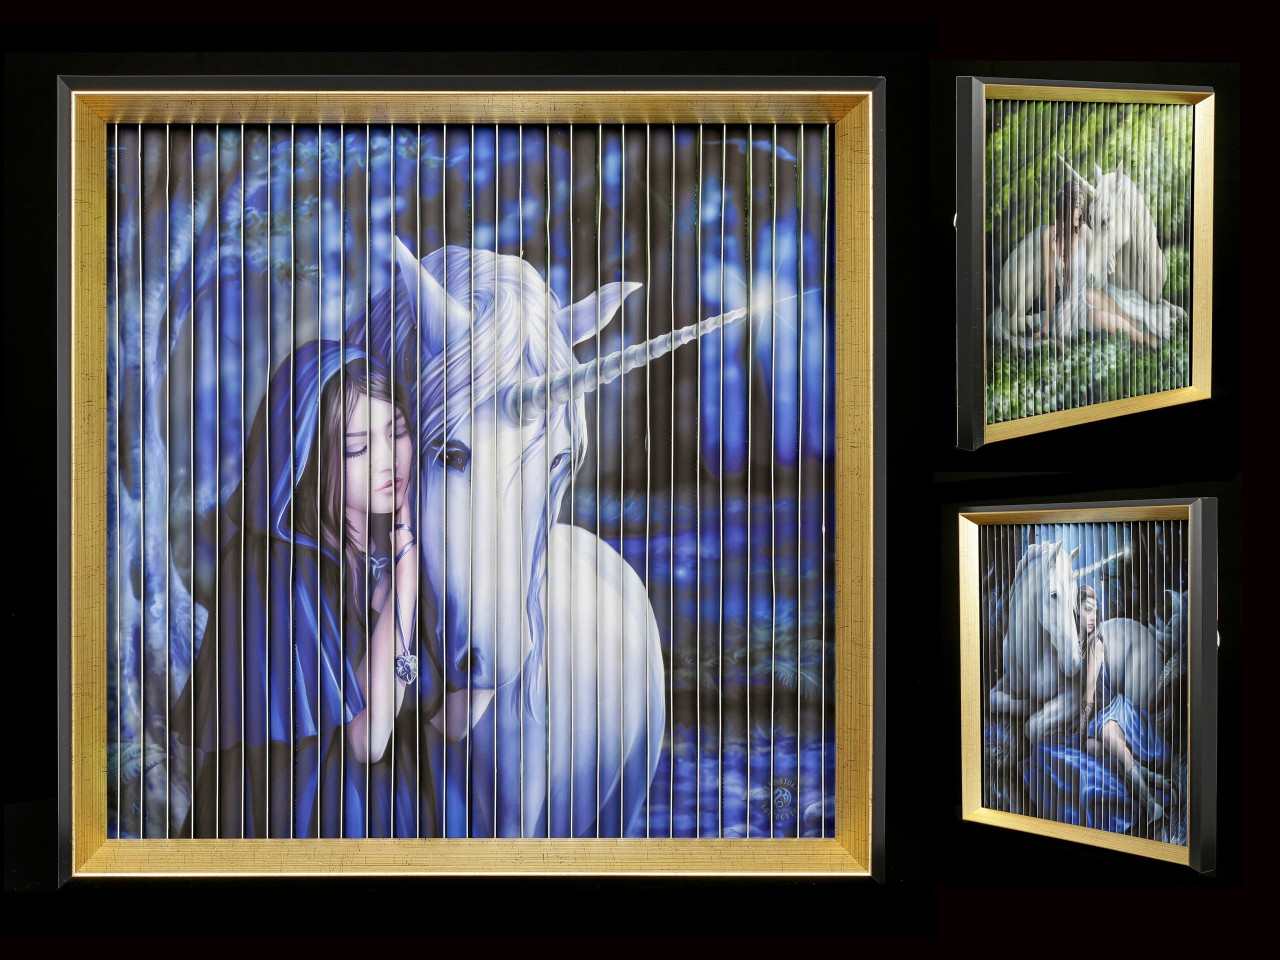 Kinetic Picture with Unicorns by Anne Stokes